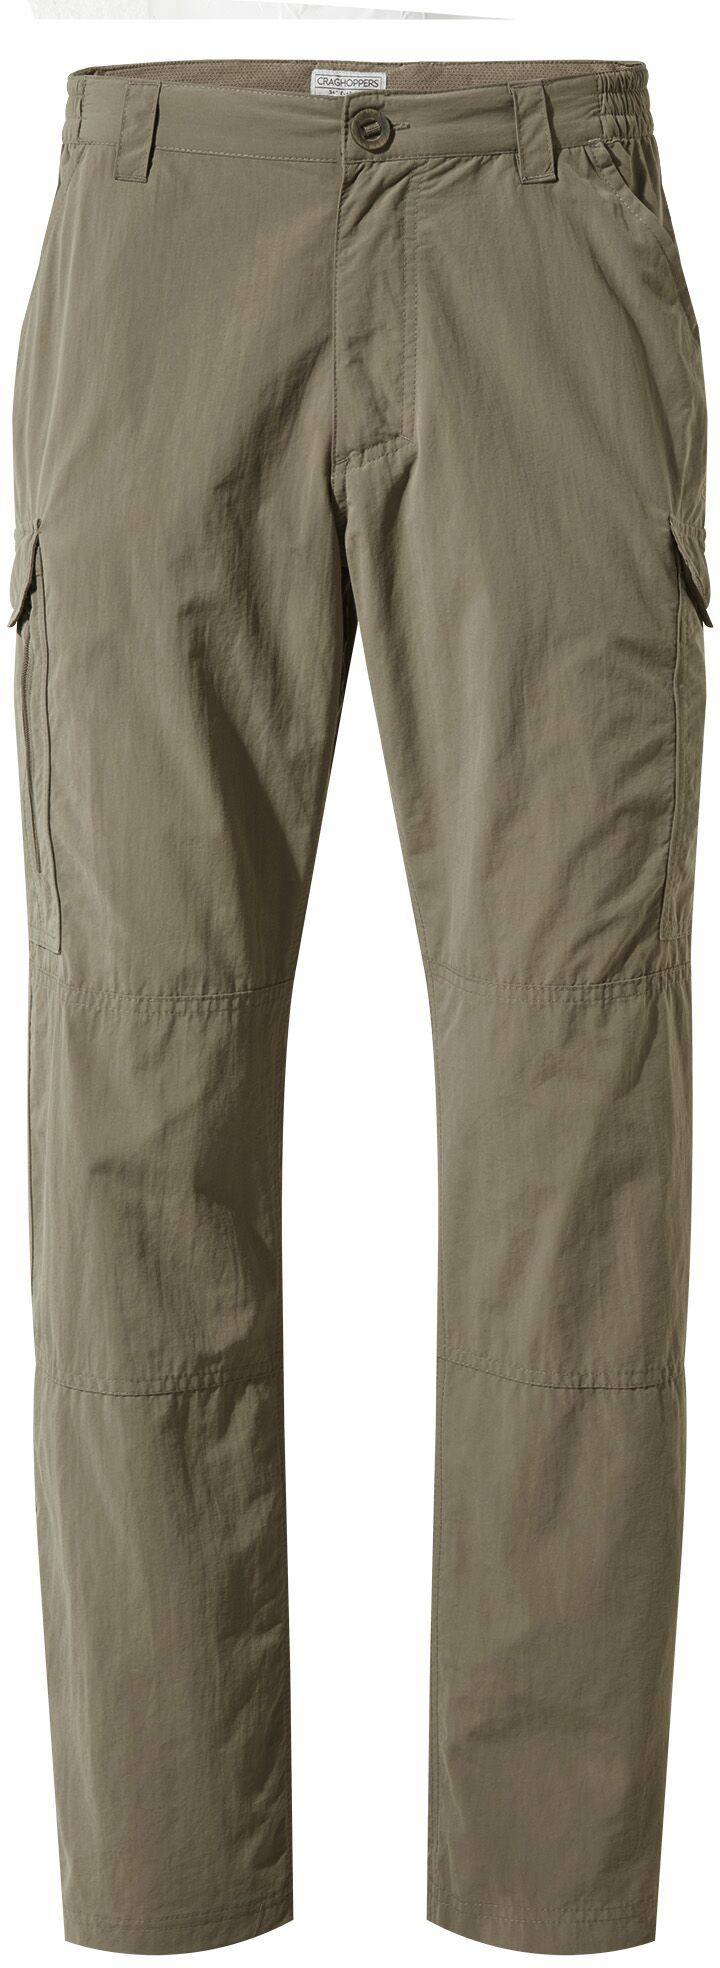 Craghoppers Nosilife Cargo Short Trousers